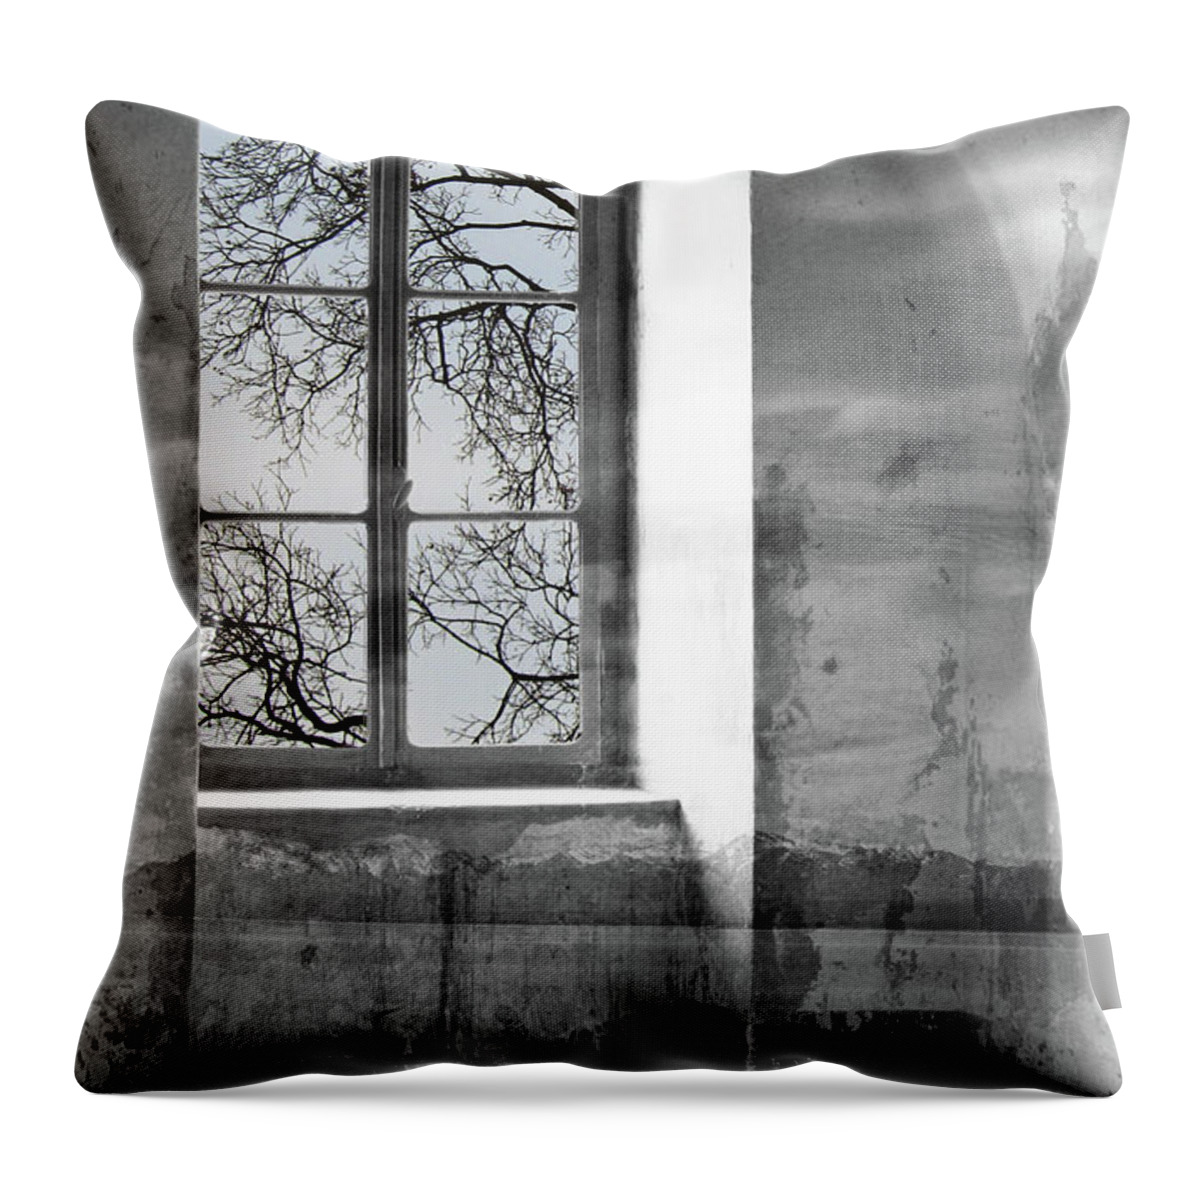 Emptiness Throw Pillow featuring the photograph Emptiness by Munir Alawi